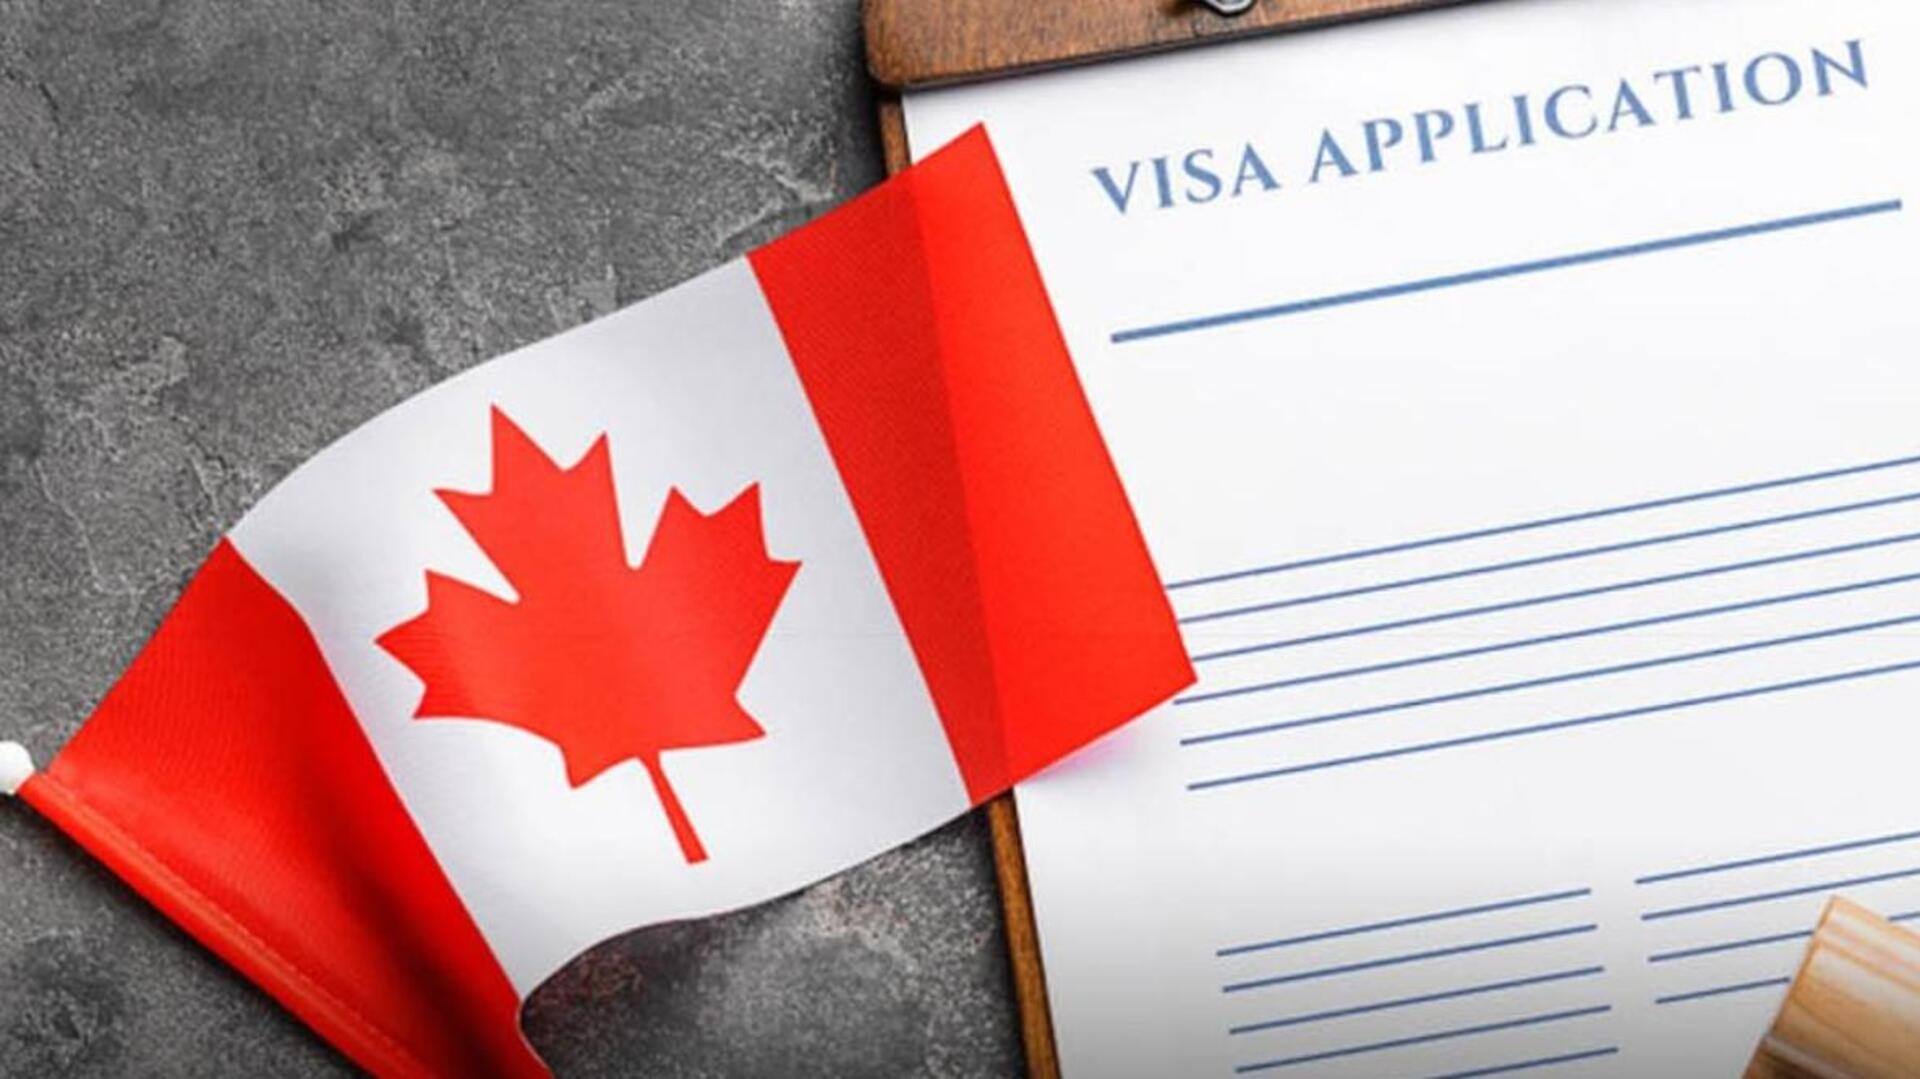 Indian visas for Canadians are still suspended in 9 categories